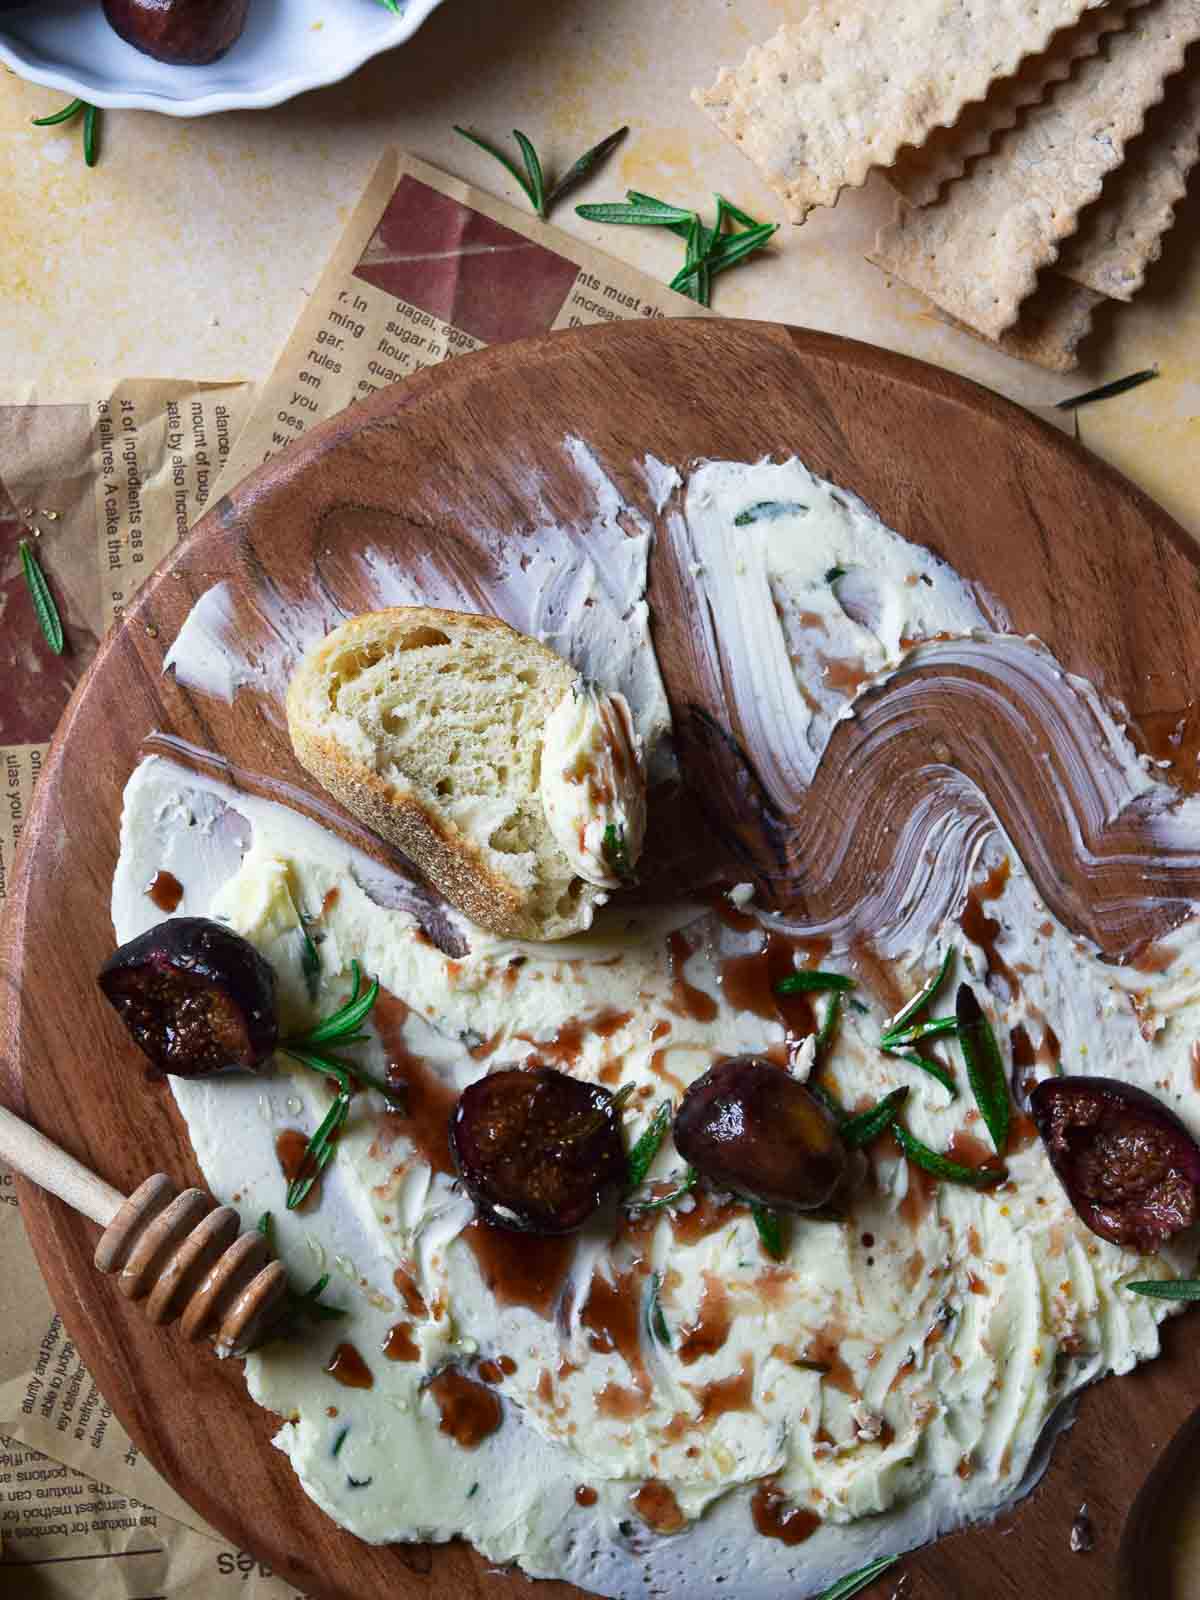 Overhead view of roasted figs and bread on a serving board with butter.